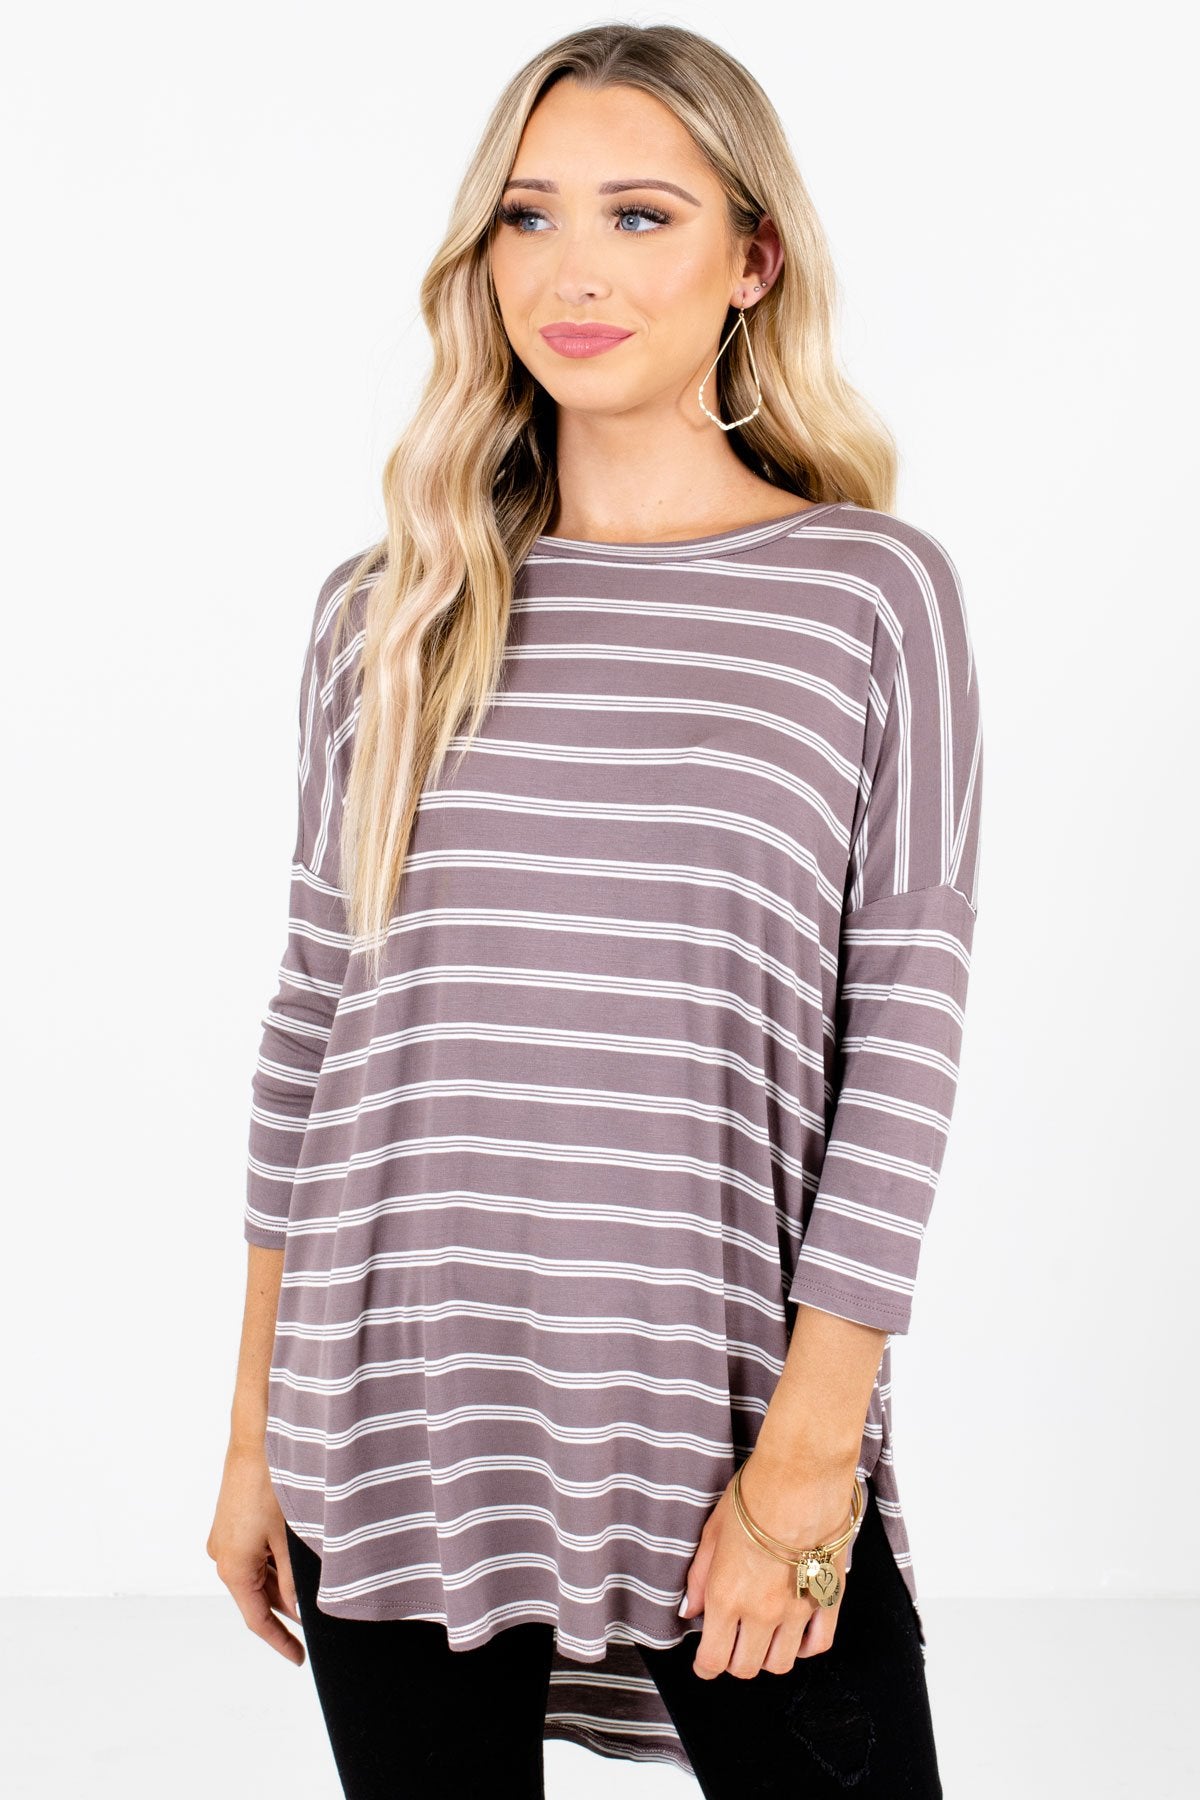 Mocha Brown and White Striped Boutique Tops for Women